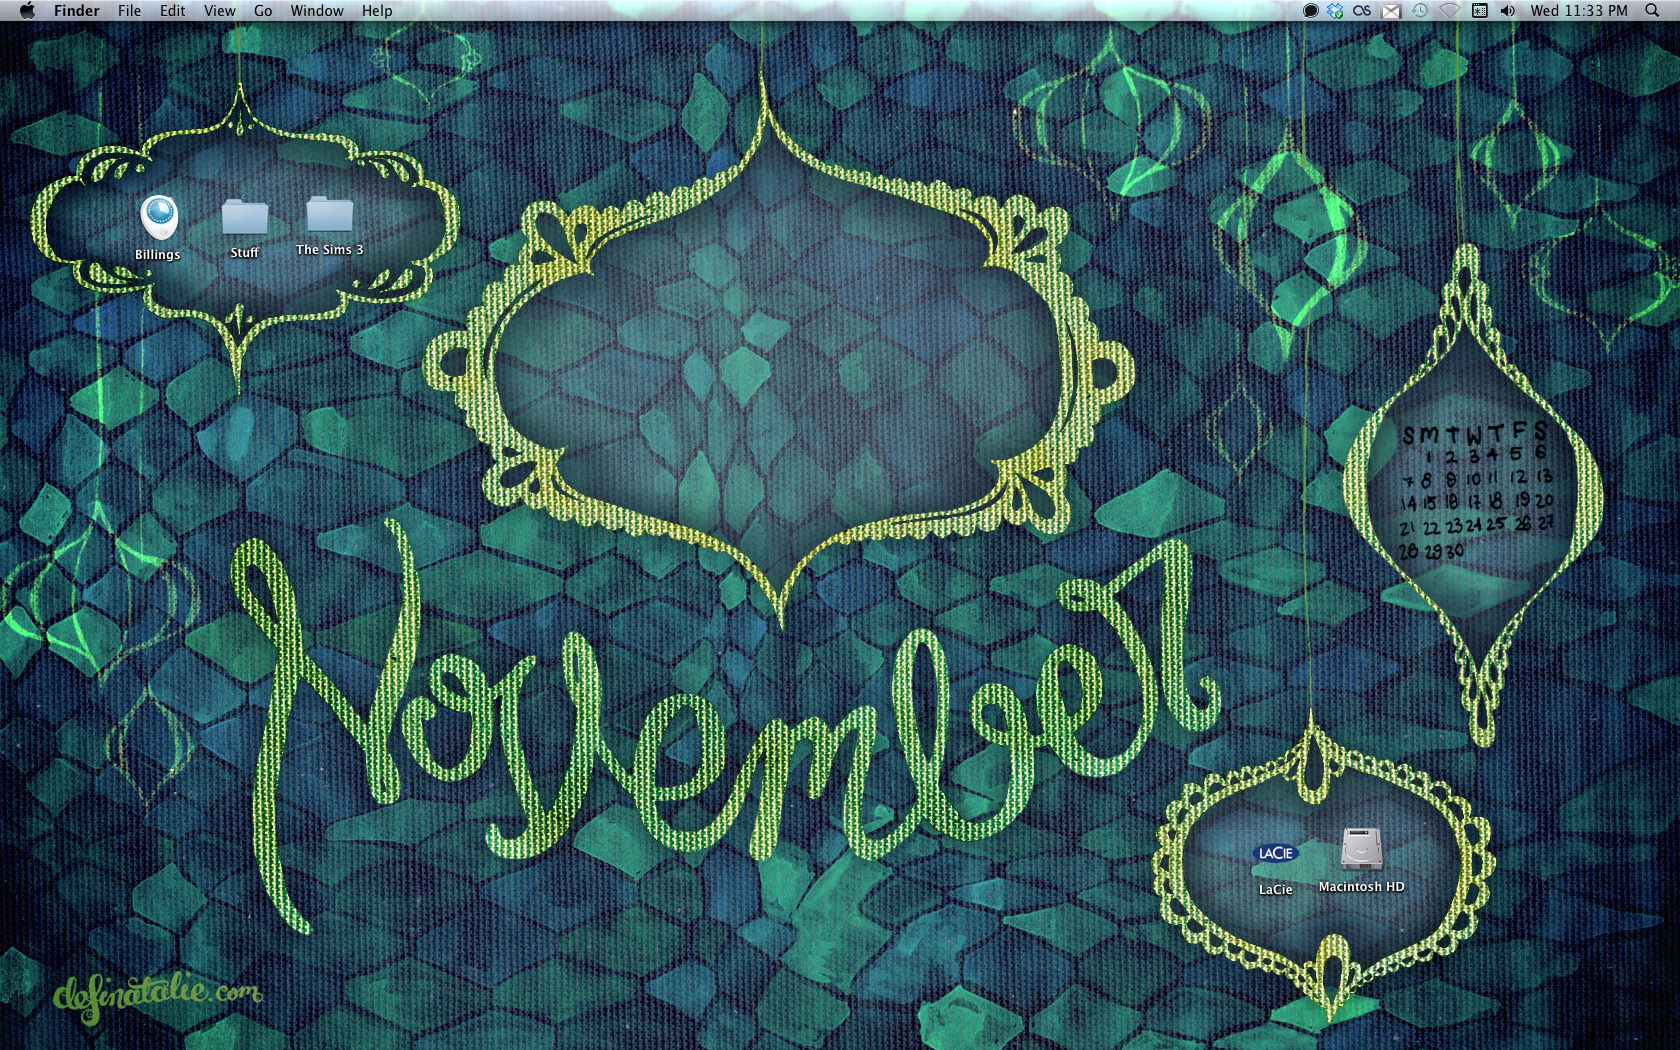 Preview image of green and blue dark fishnet patterned wallpaper with gold textured frames hanging from the top of the image. A big loopy lettered "November" sits in the centre.